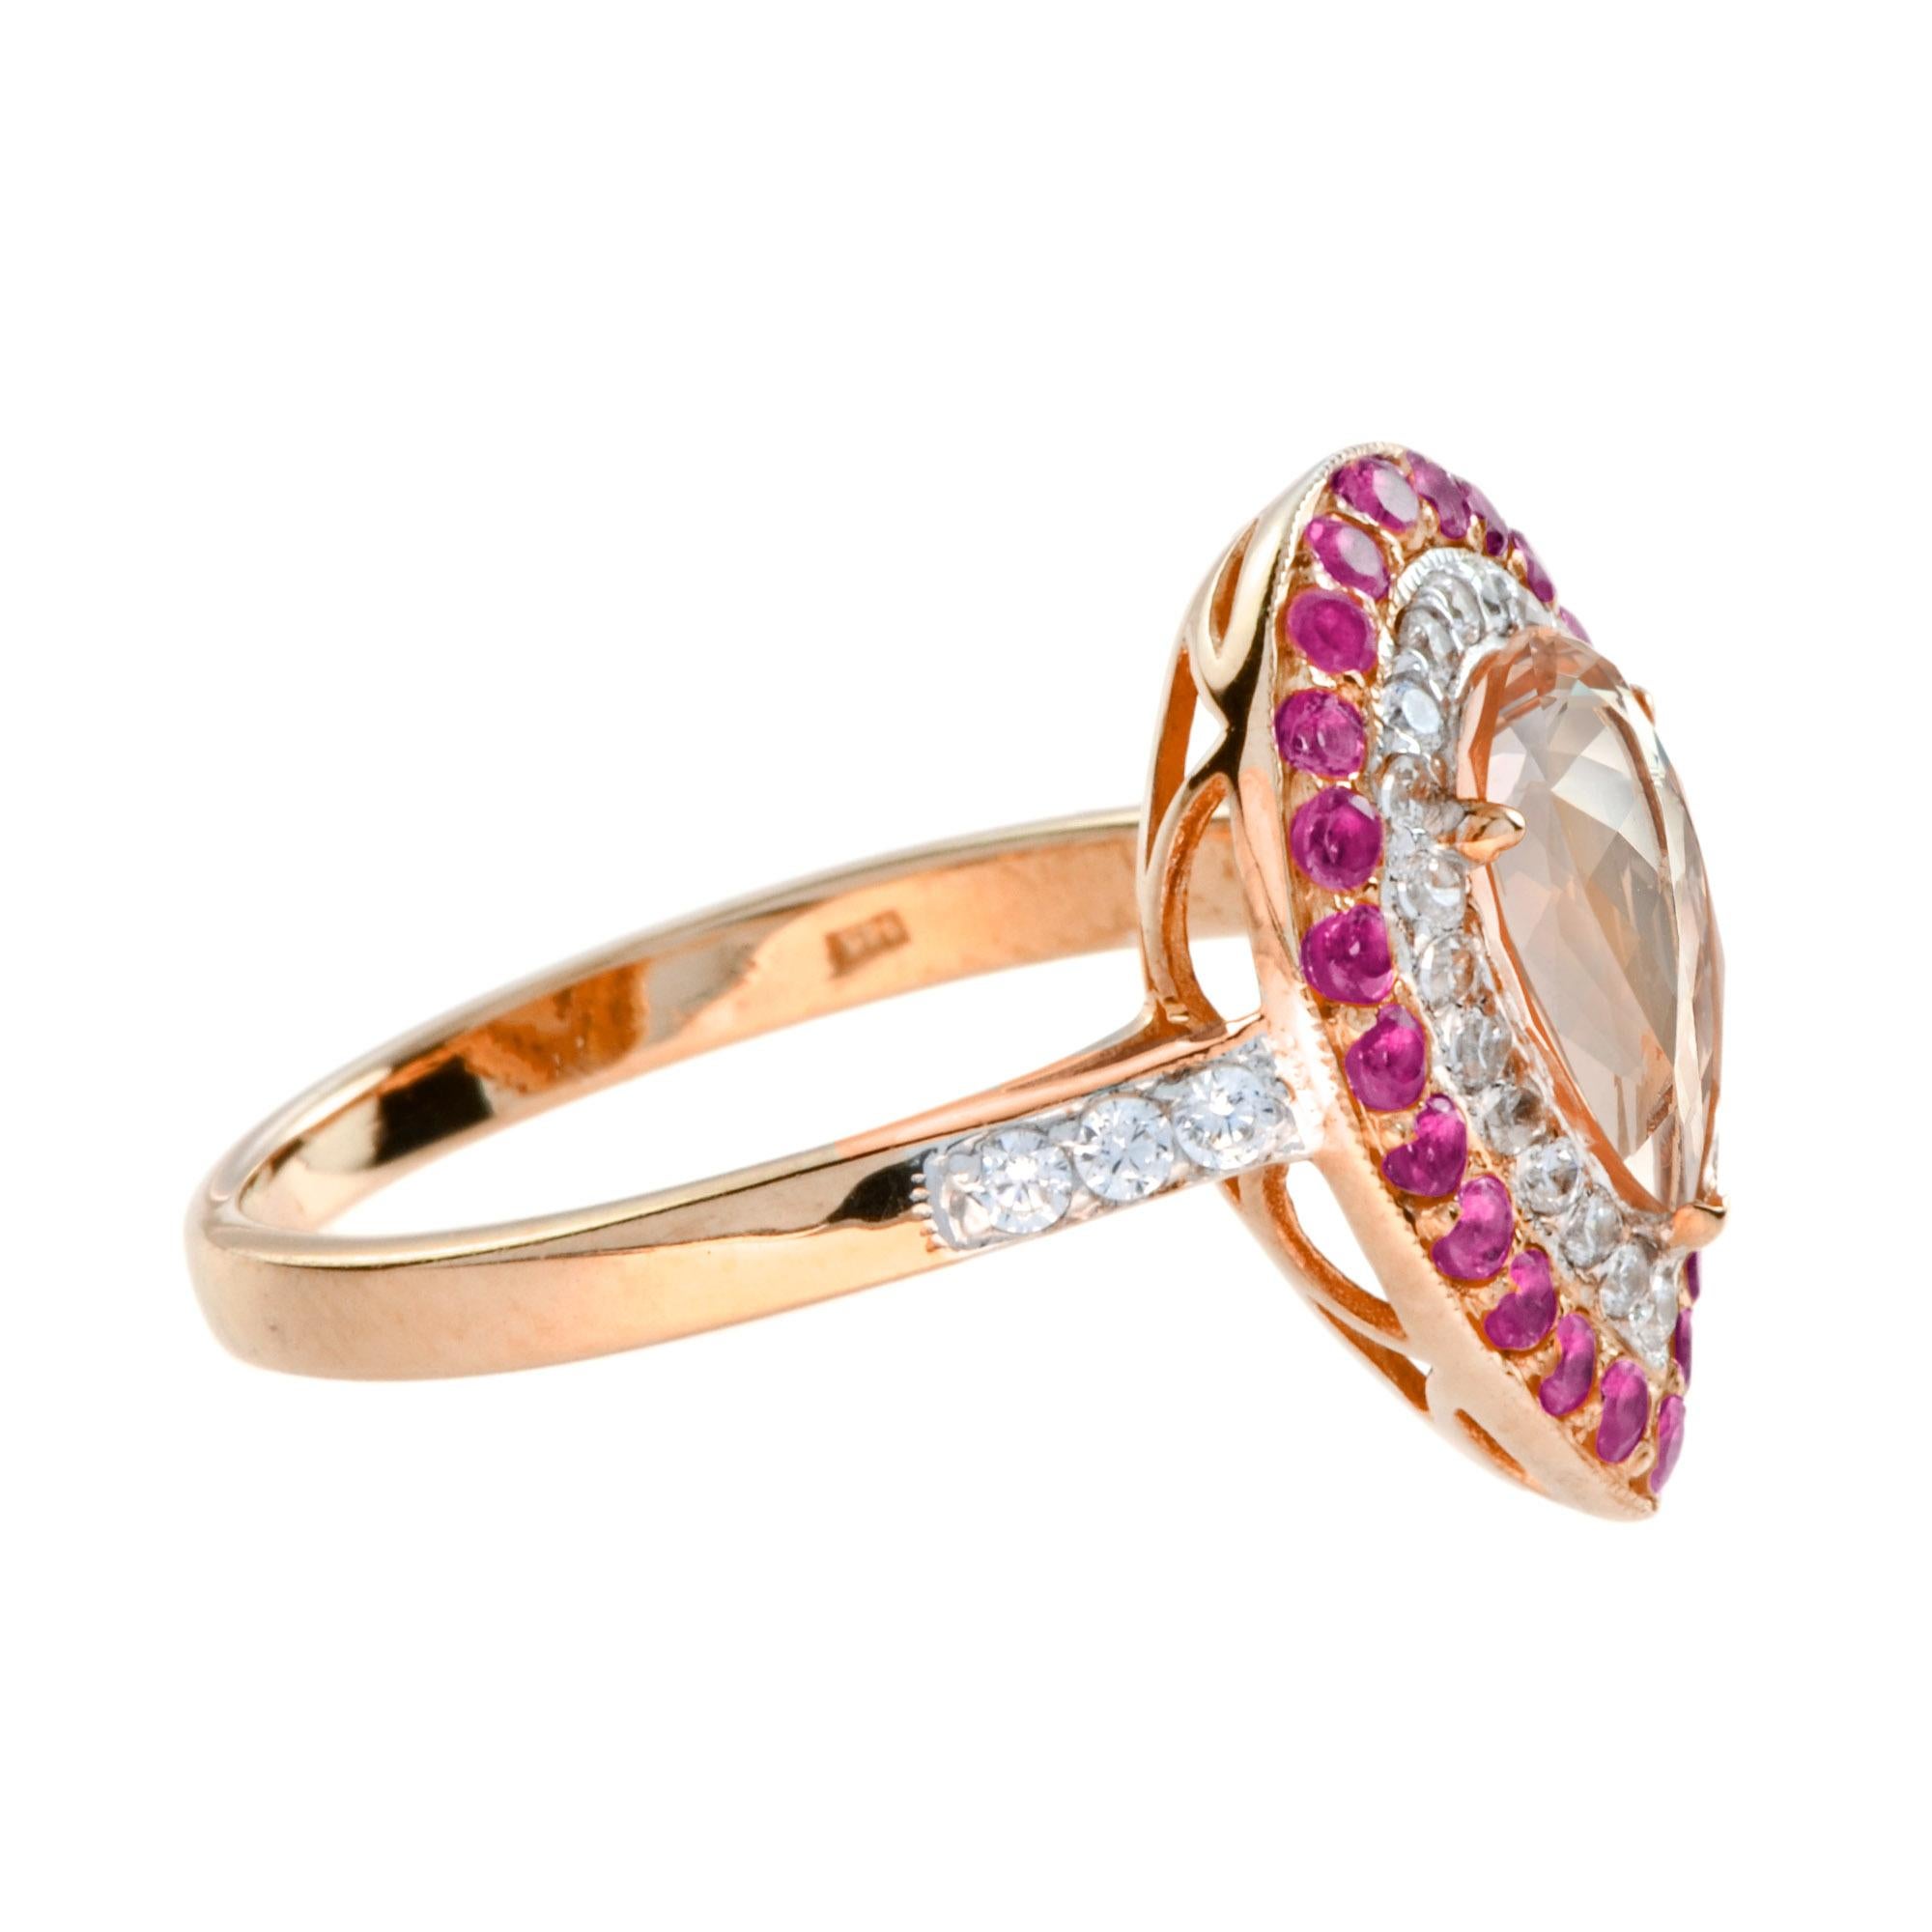 For Sale:  Morganite Diamond Ruby Pear Shaped Halo  Engagement Ring in 14K Rose Gold 4